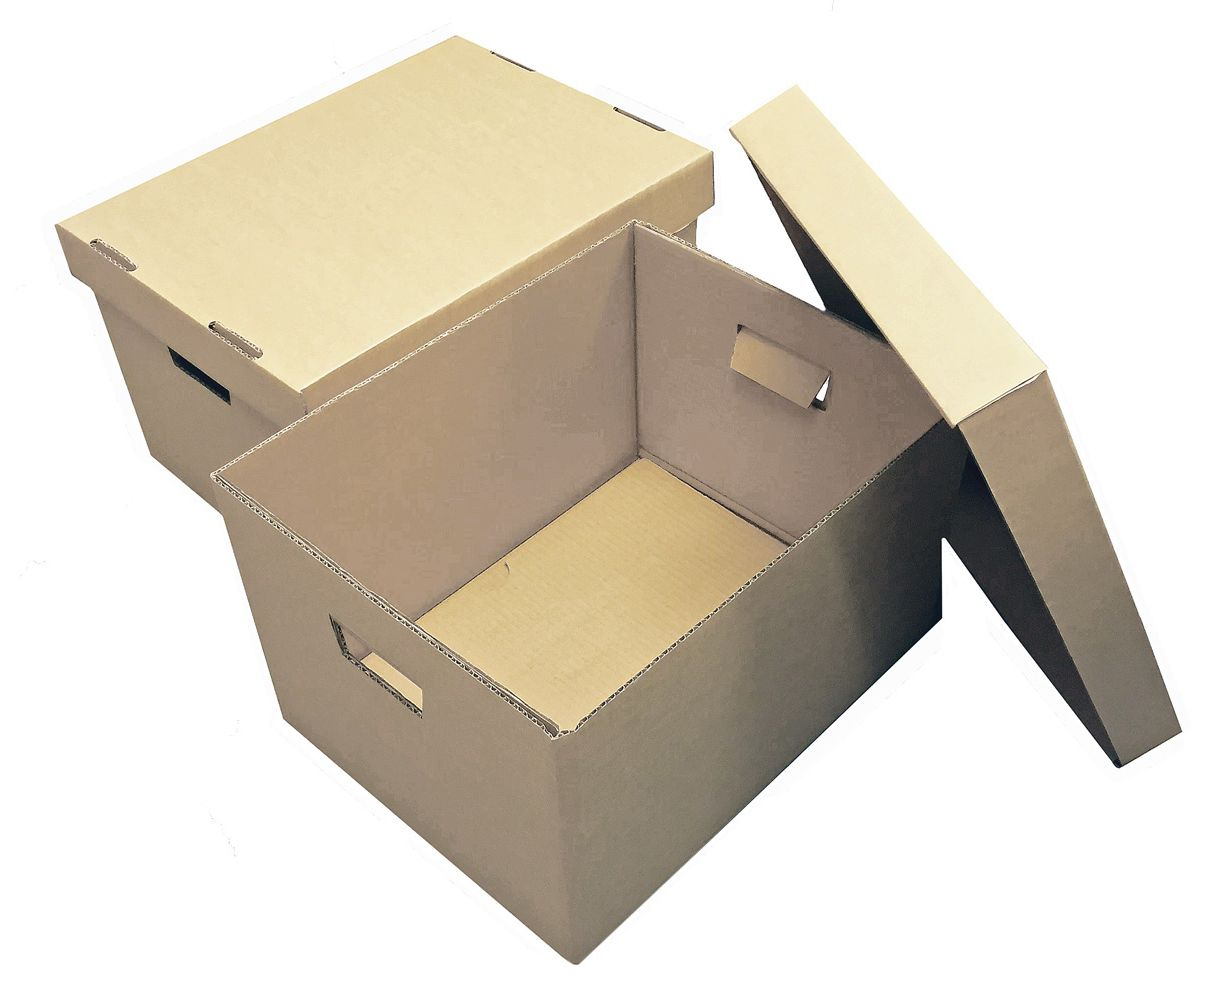 Archive Boxes Packaging2buy Cardboard Storage Boxes Uk throughout sizing 1205 X 1007